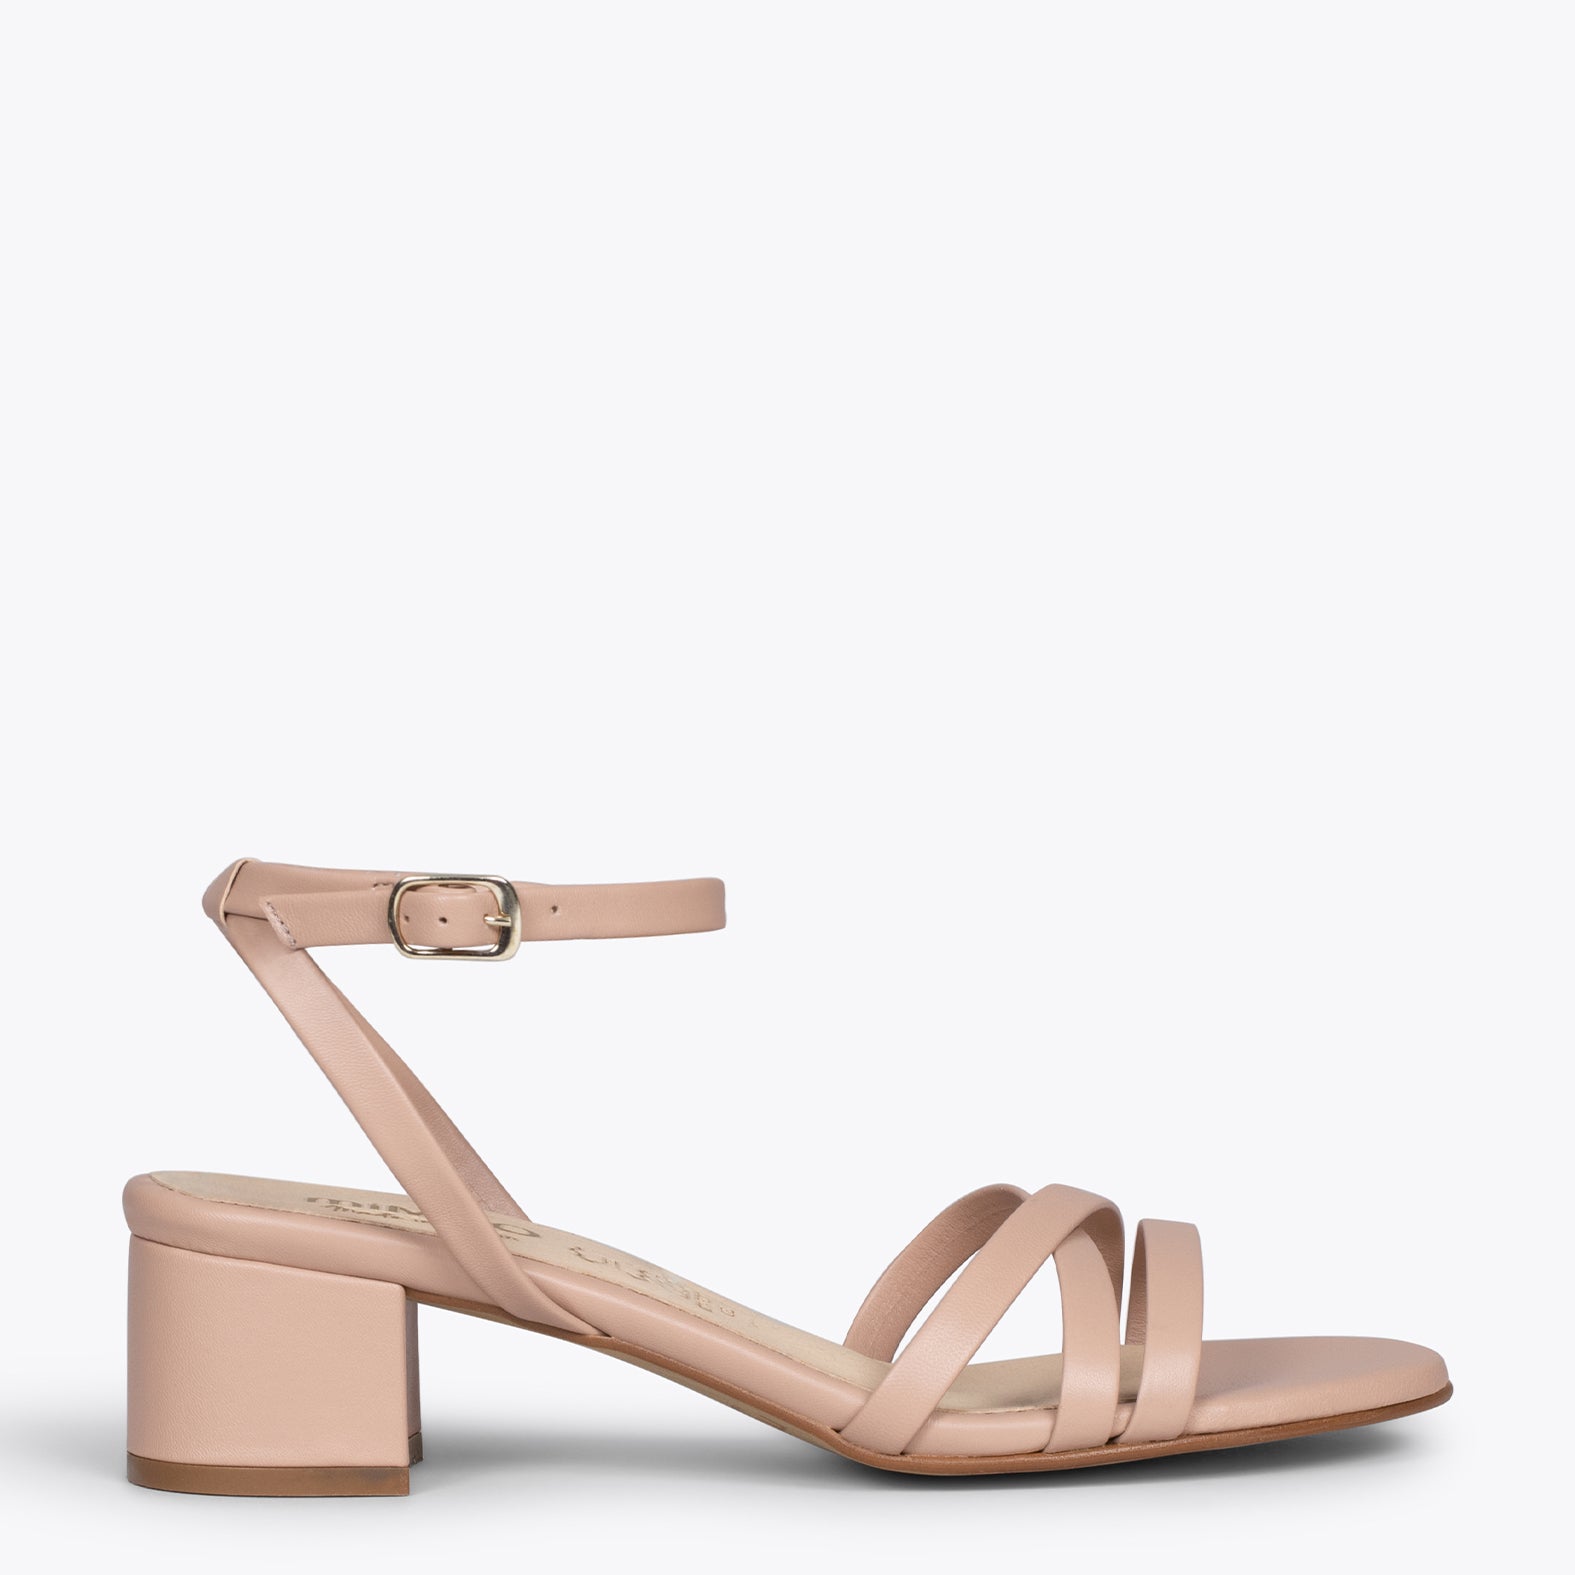 VIENA – NUDE sandals with straps